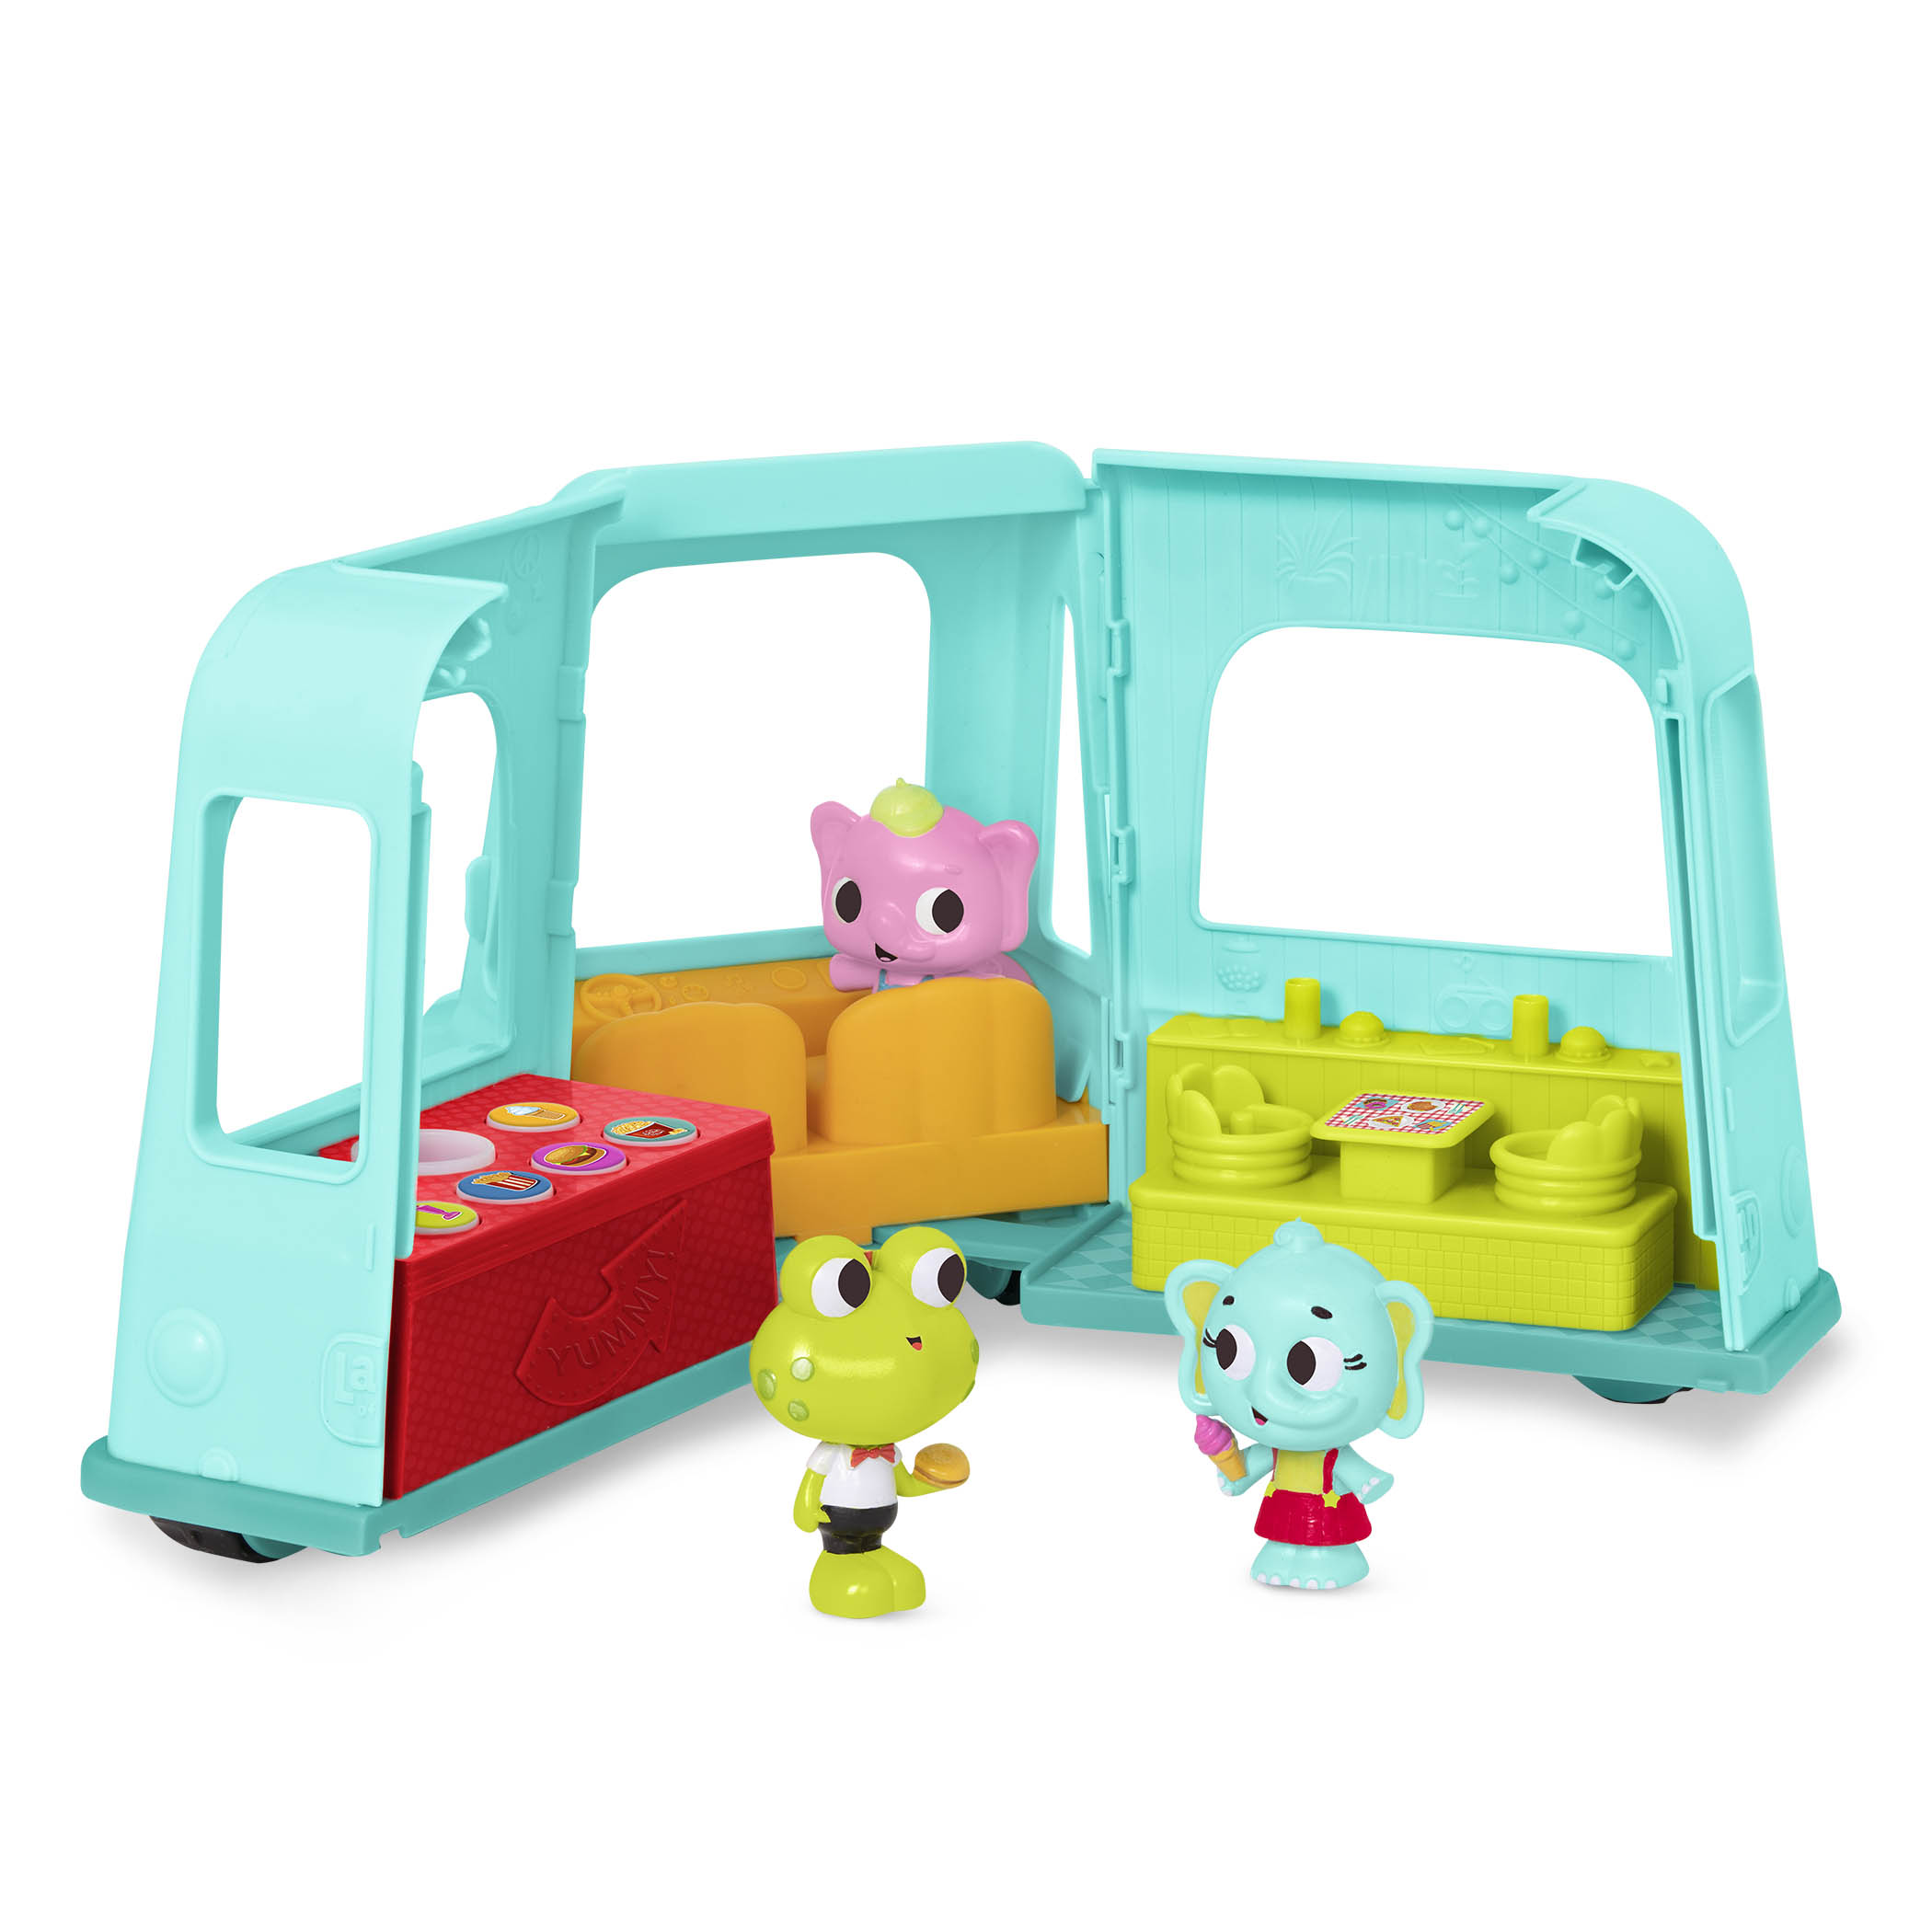 Cutie Cars Shopkins Drive Thru Diner & Exclusive Car Packs Toy Opening  Review